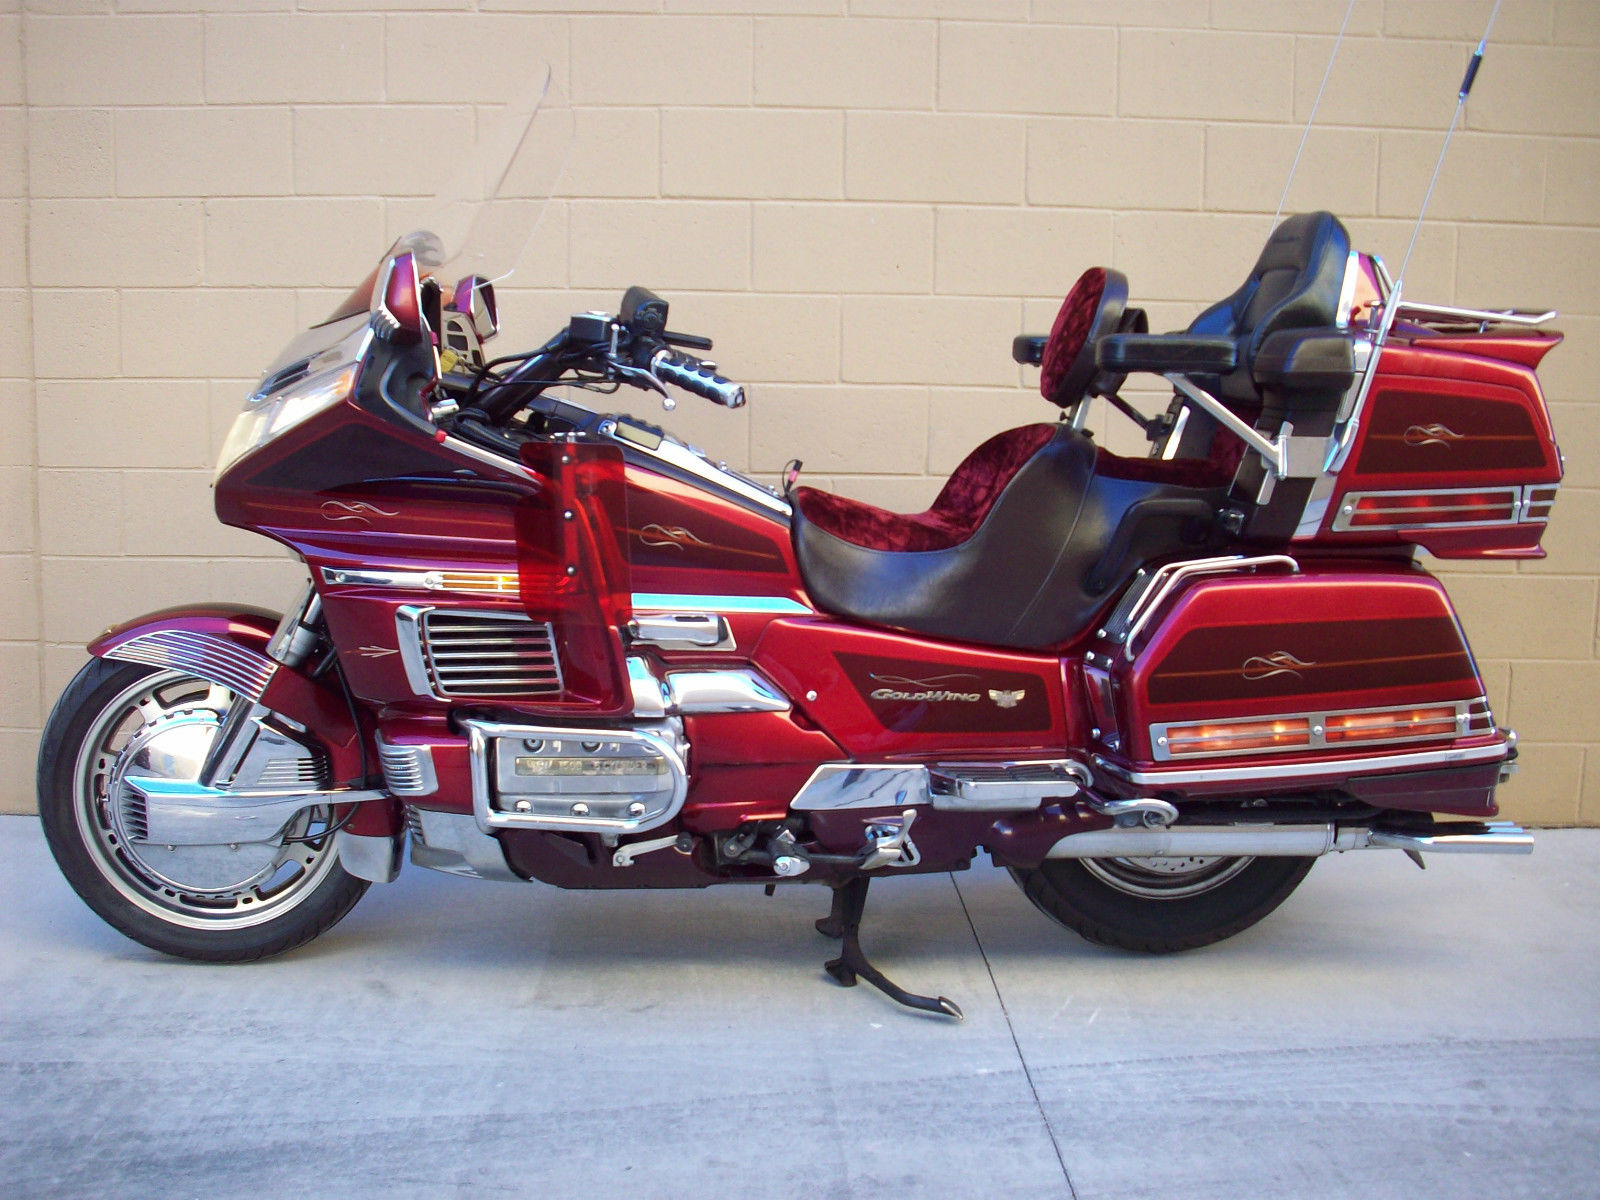 racket dood mist 95 HONDA GOLDWING GL1500 SE, CANDY RED, BEAUTIFUL, TOTALLY LOADED,  EXCEPTIONAL!